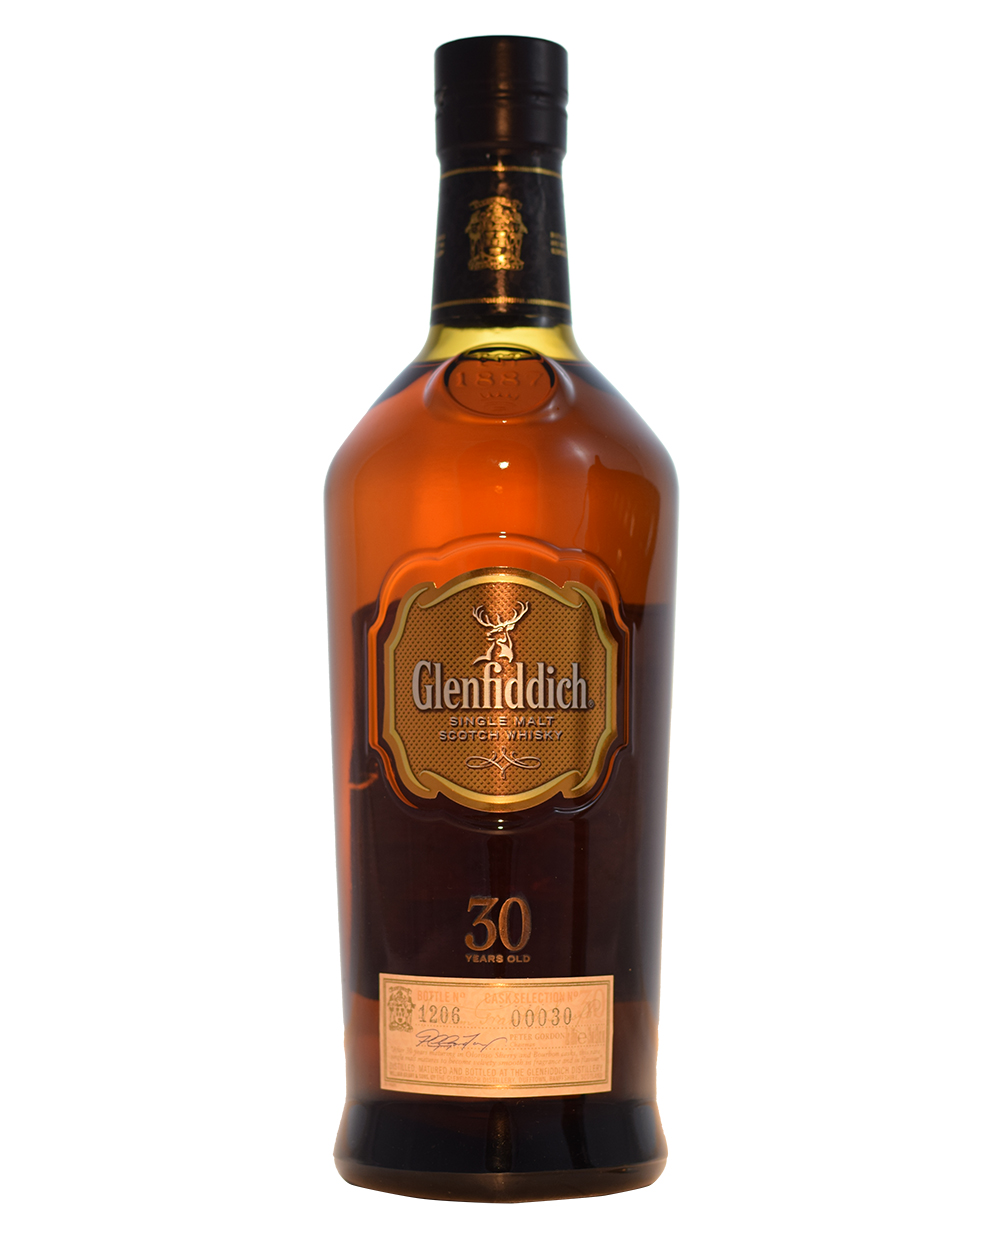 Glenfiddich 30 Years Old 00030 Musthave Malts MHM